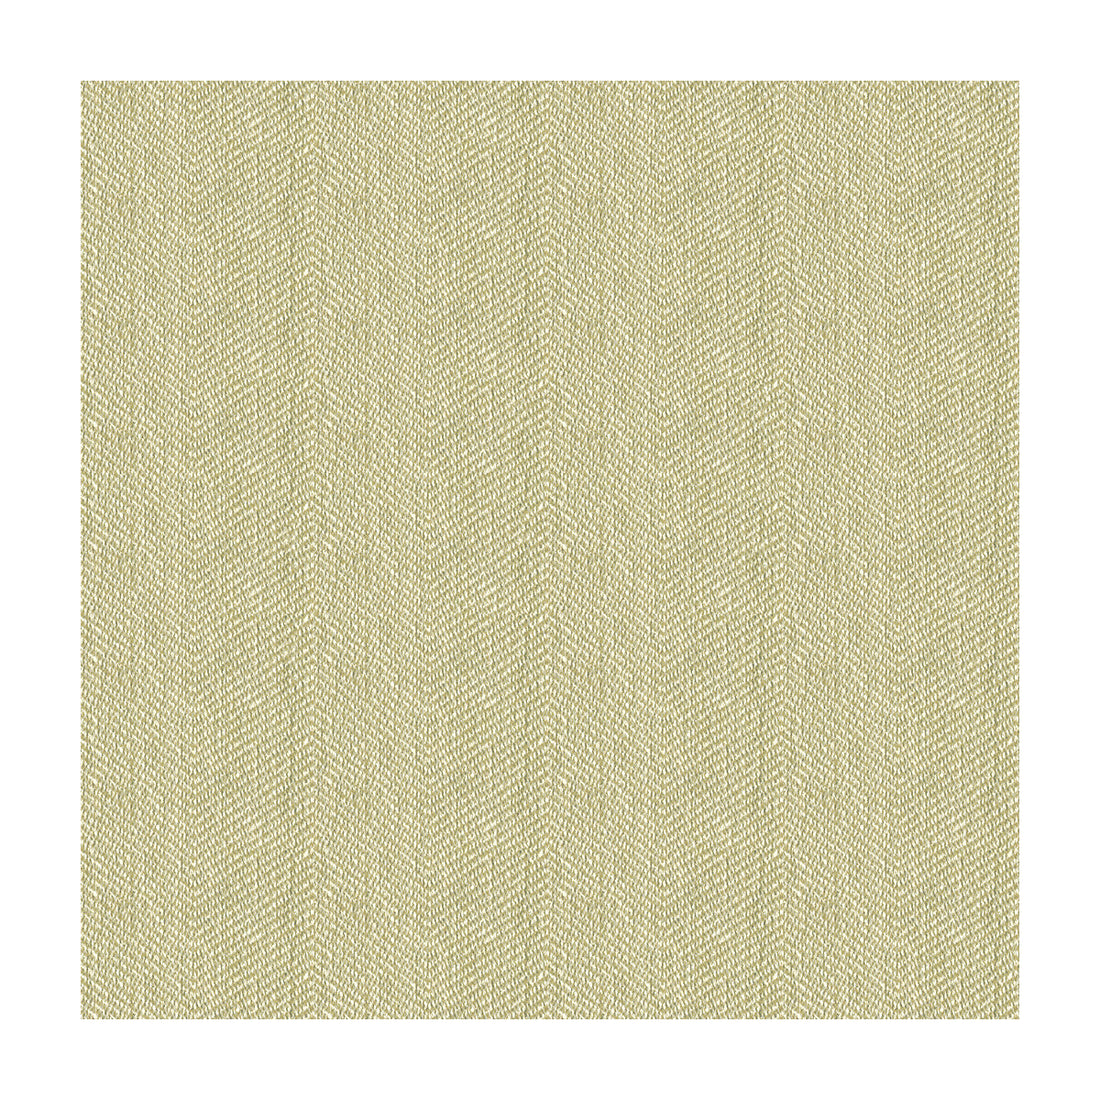 Kravet Smart fabric in 33832-1111 color - pattern 33832.1111.0 - by Kravet Smart in the Performance Crypton Home collection